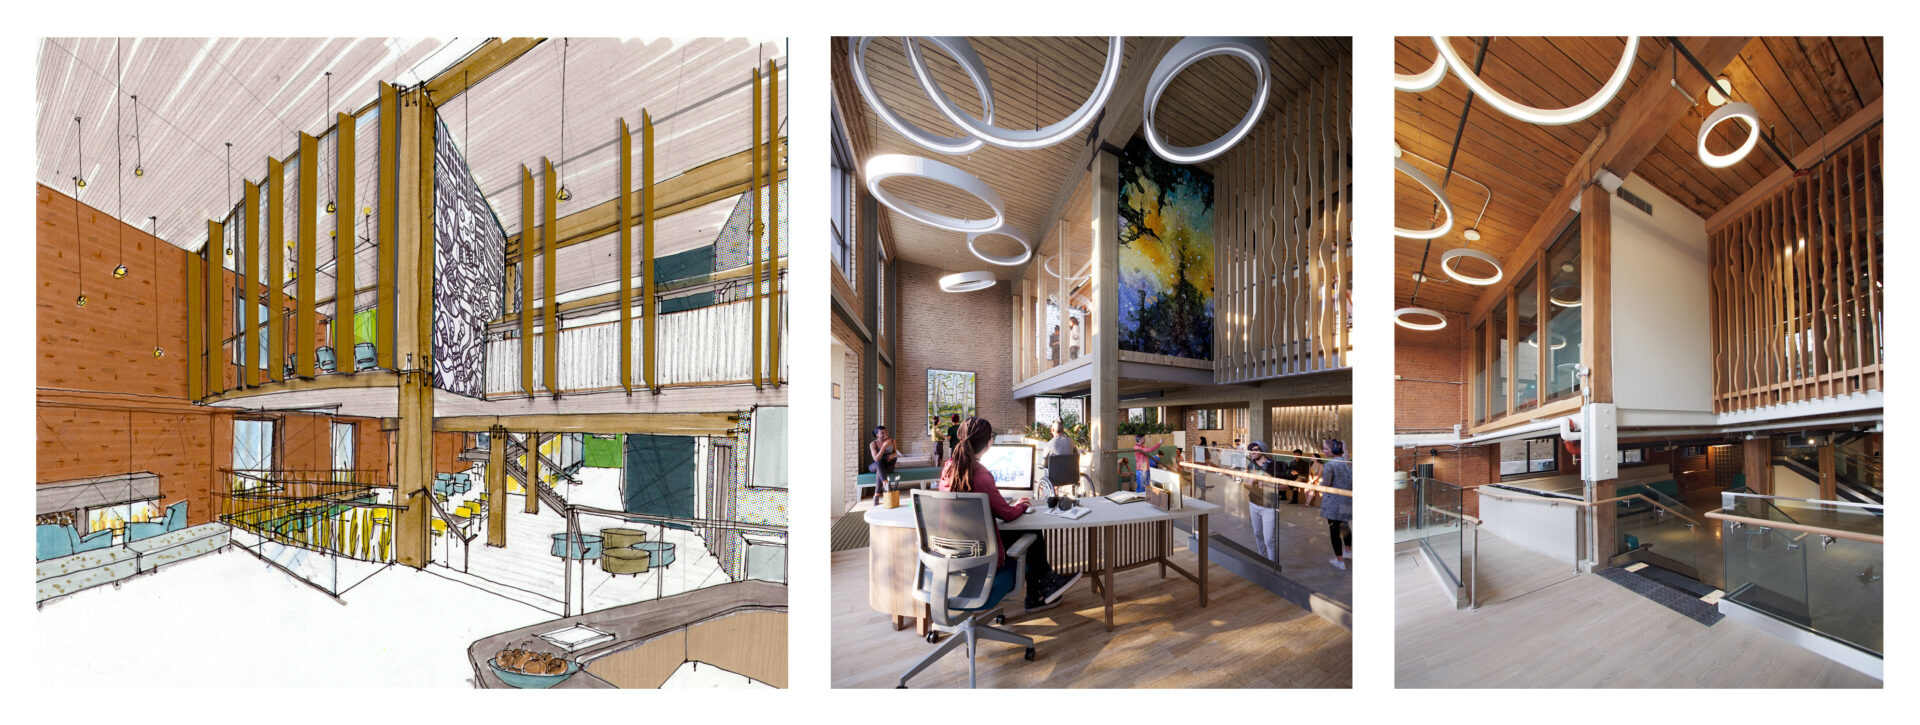 3 images of the Stella's Place cafe lined up side by side. On the left is an architectural drawing of the space. The middle is a digital rendering of the space with illustrations of people walking inside. The right is an actual image of the space, featuring the circular lights hanging from the ceiling and the loft space above.